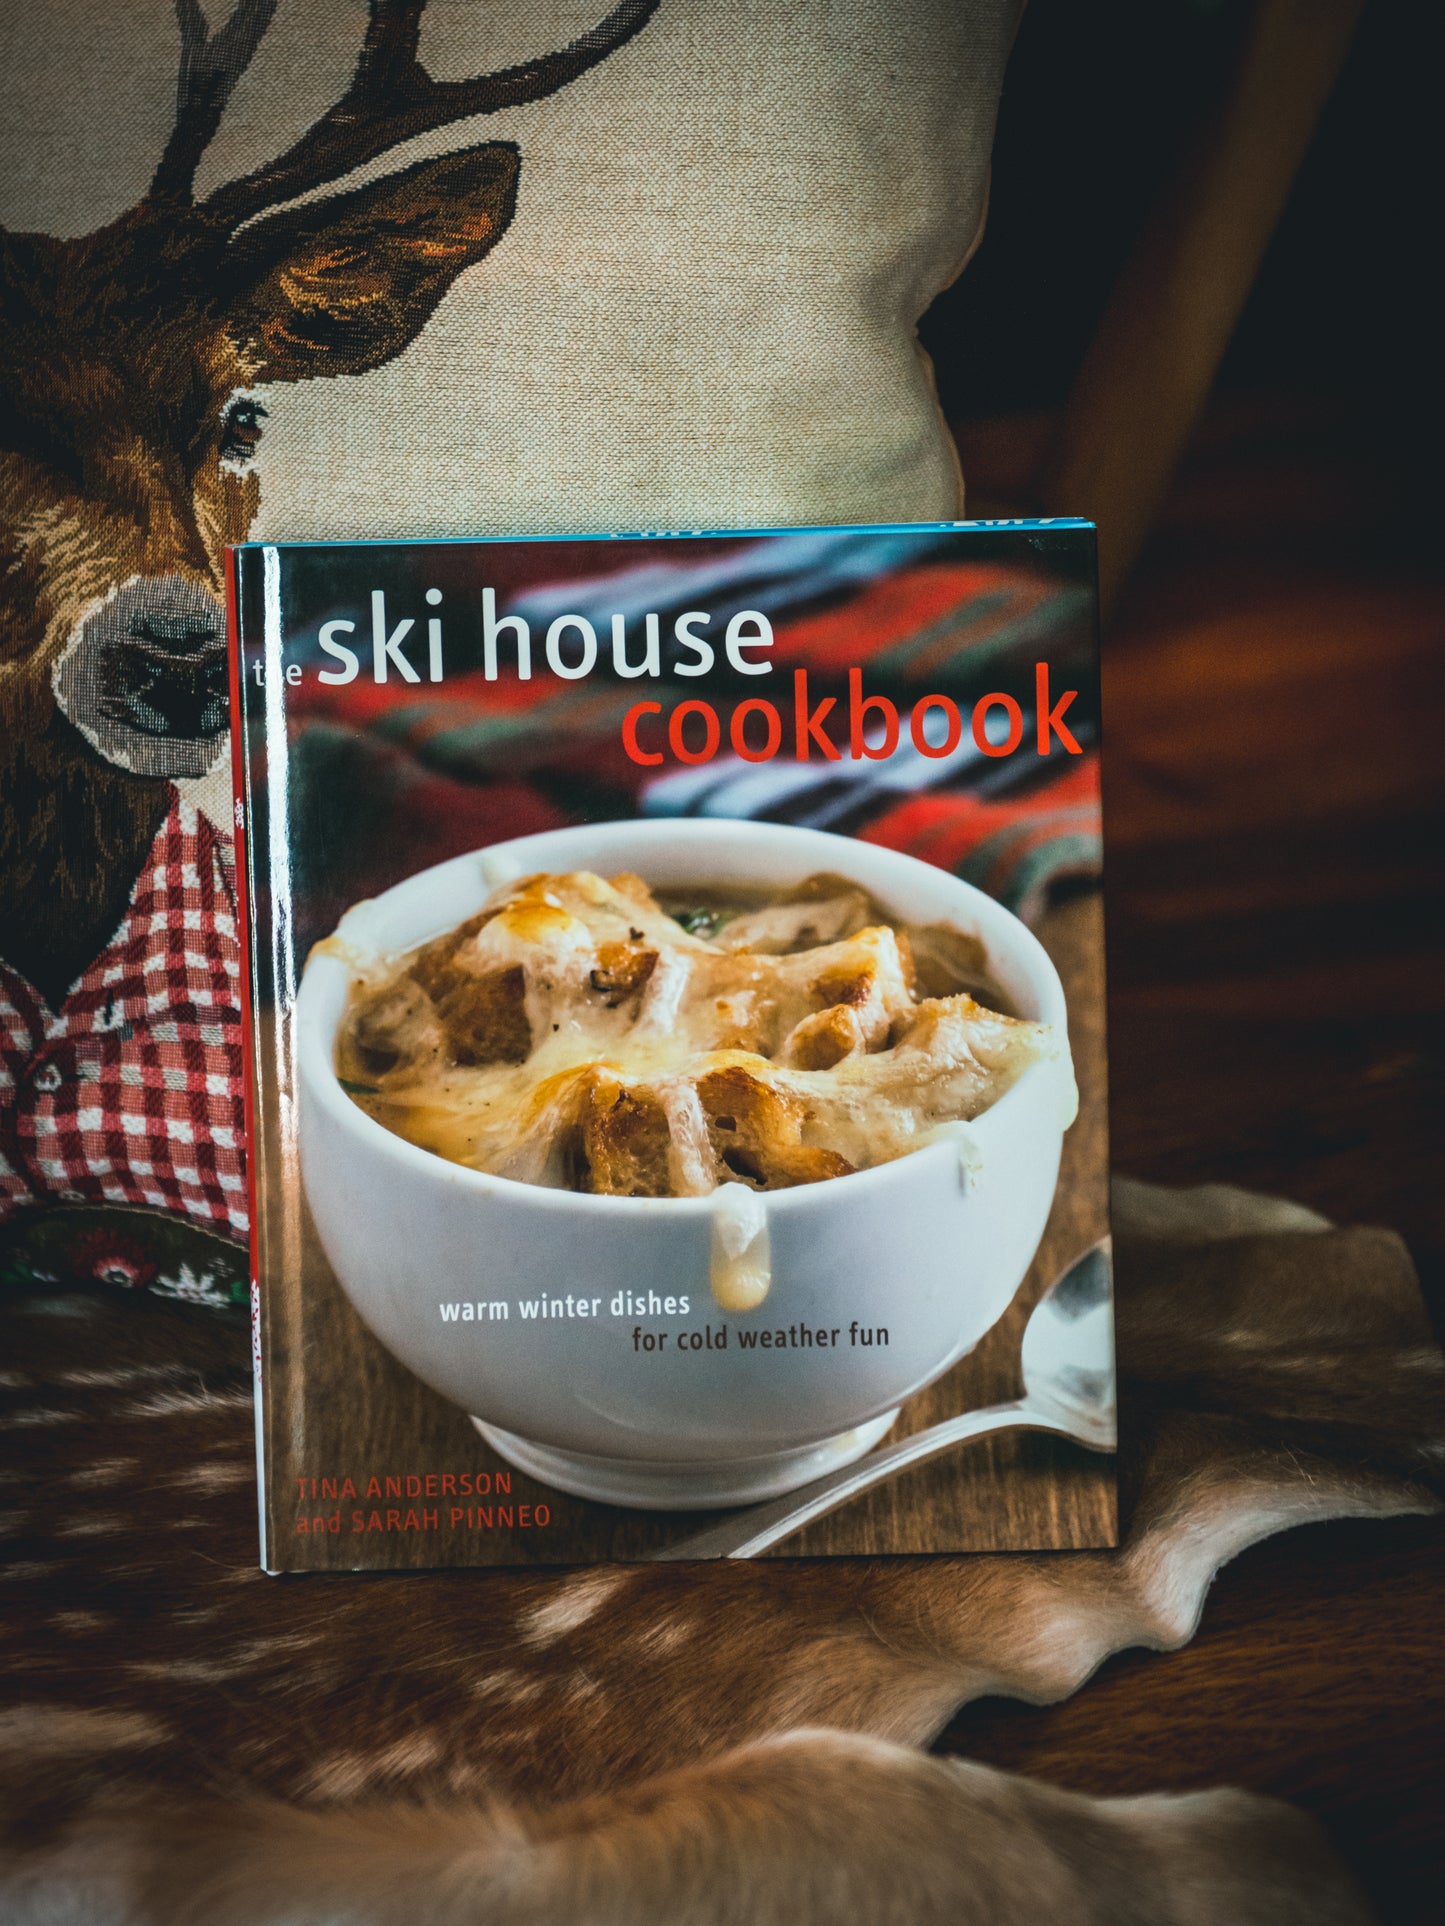 Ski House Cookbook by Tina Anderson Weston Table